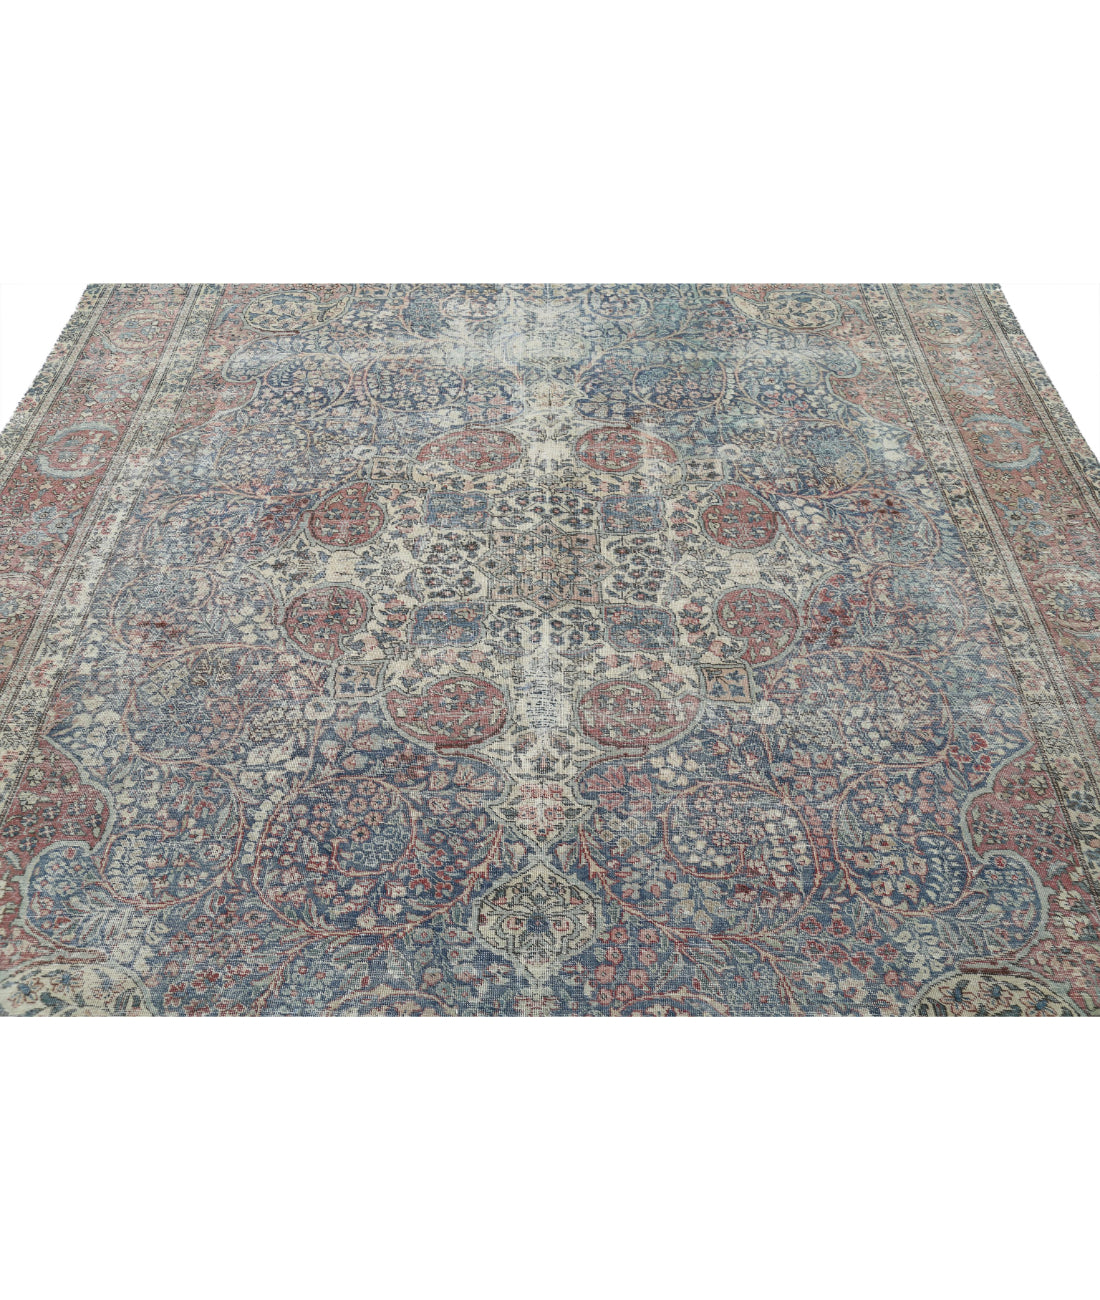 Hand Knotted Antique Persian Tabriz Wool Rug - 8'2'' x 11'2'' 8'2'' x 11'2'' (245 X 335) / Blue / Red